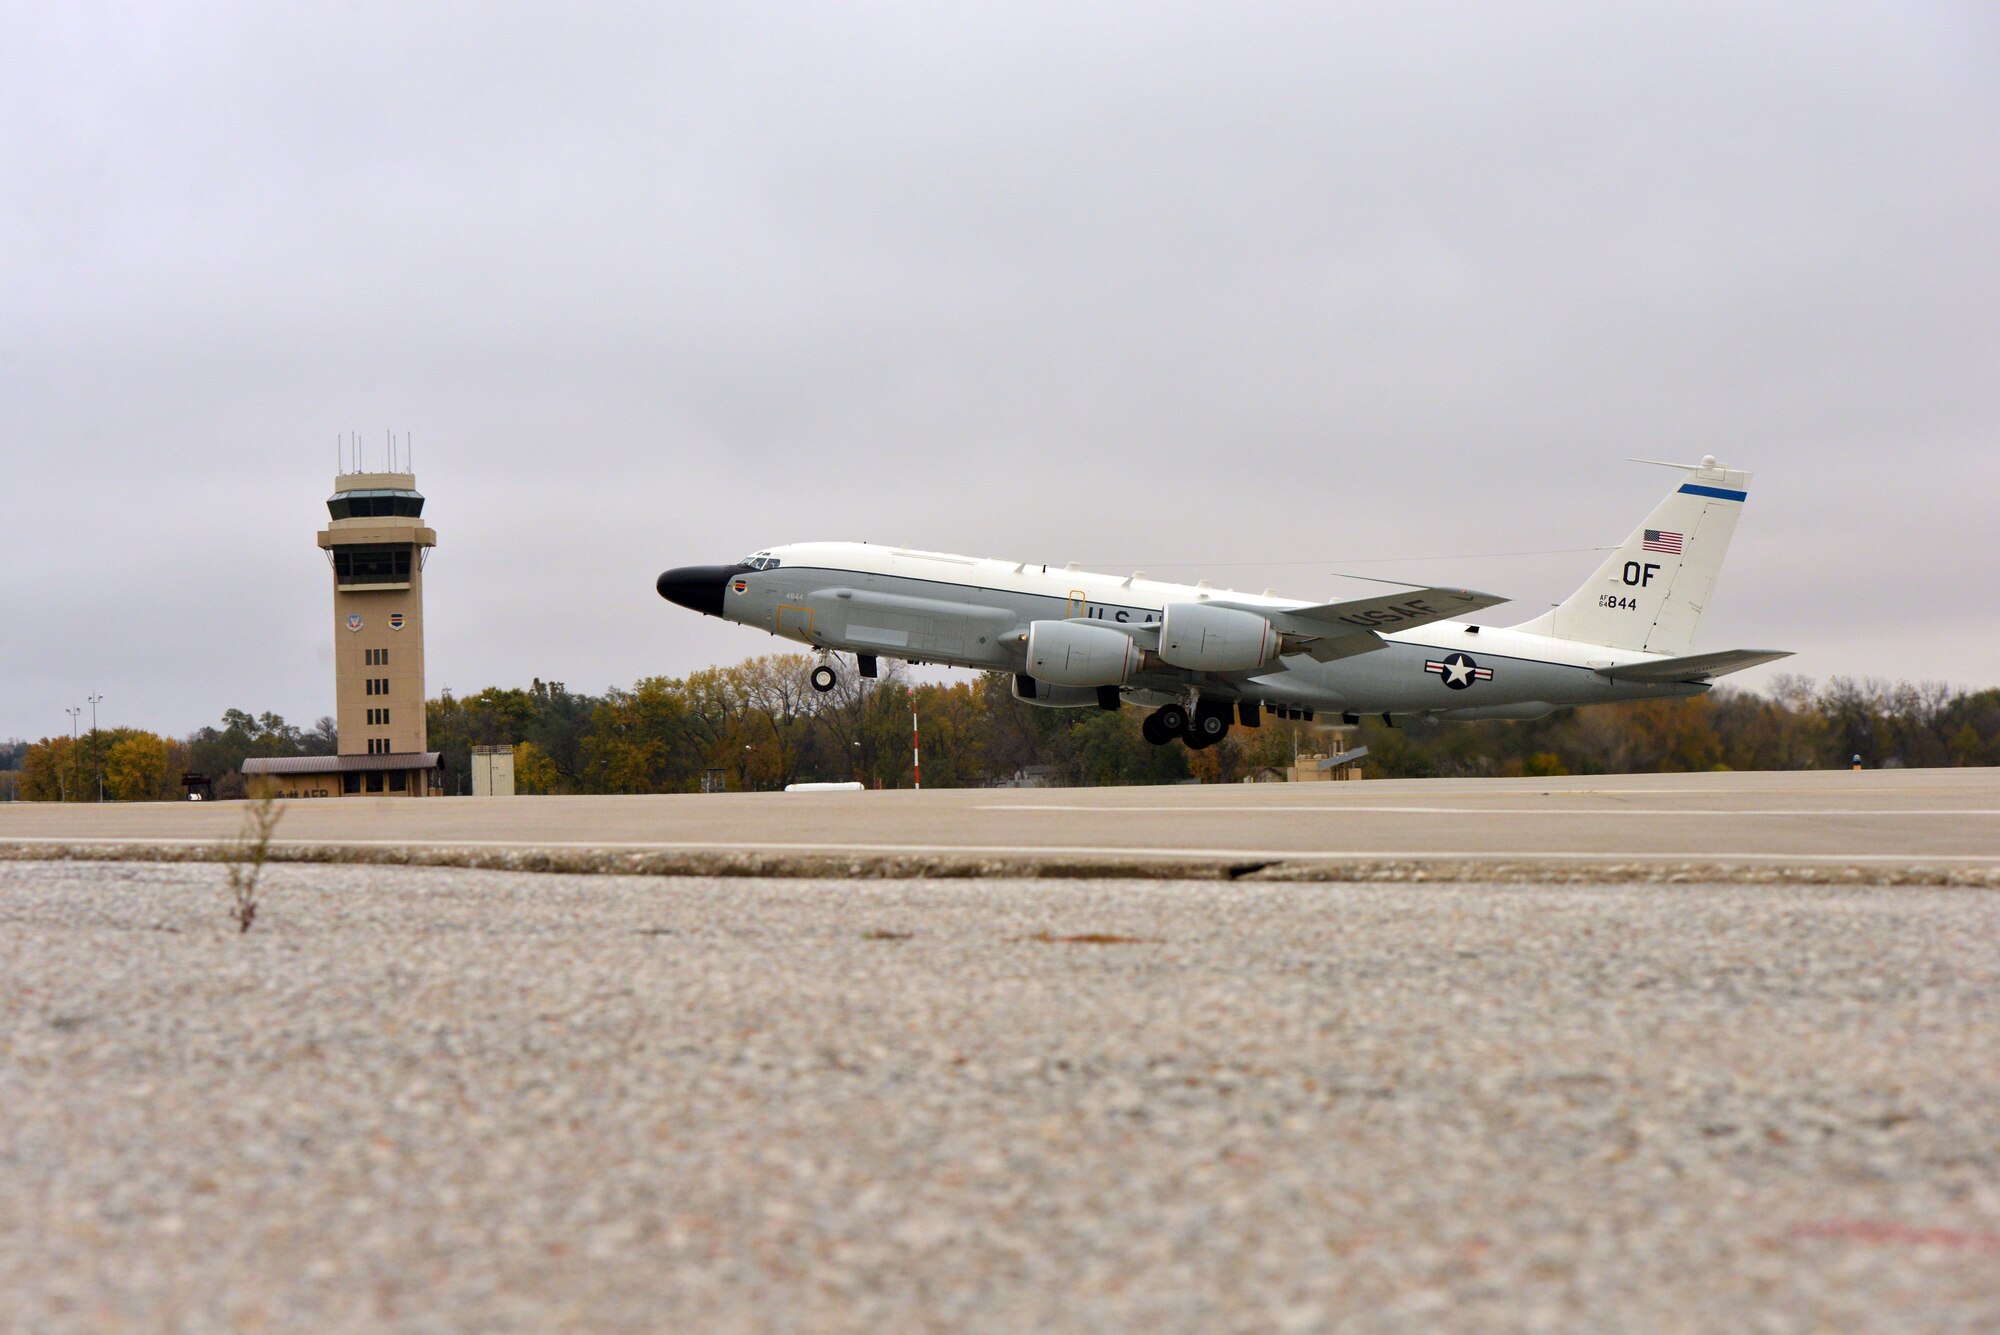 An Offutt-based RC-135 V/W Rivet Joint leaps into the air during Global Thunder 17, U.S. Strategic Command’s annual command post and field training exercise, Oct. 30, 2016, at Offutt Air Force Base, Neb. The exercise provided training opportunities for USSTRATCOM-tasked components, task forces, units and command posts to deter and, if necessary, defeat a military attack against the United States and to employ forces as directed by the President. (U.S. Air Force Photo by Drew Nystrom)